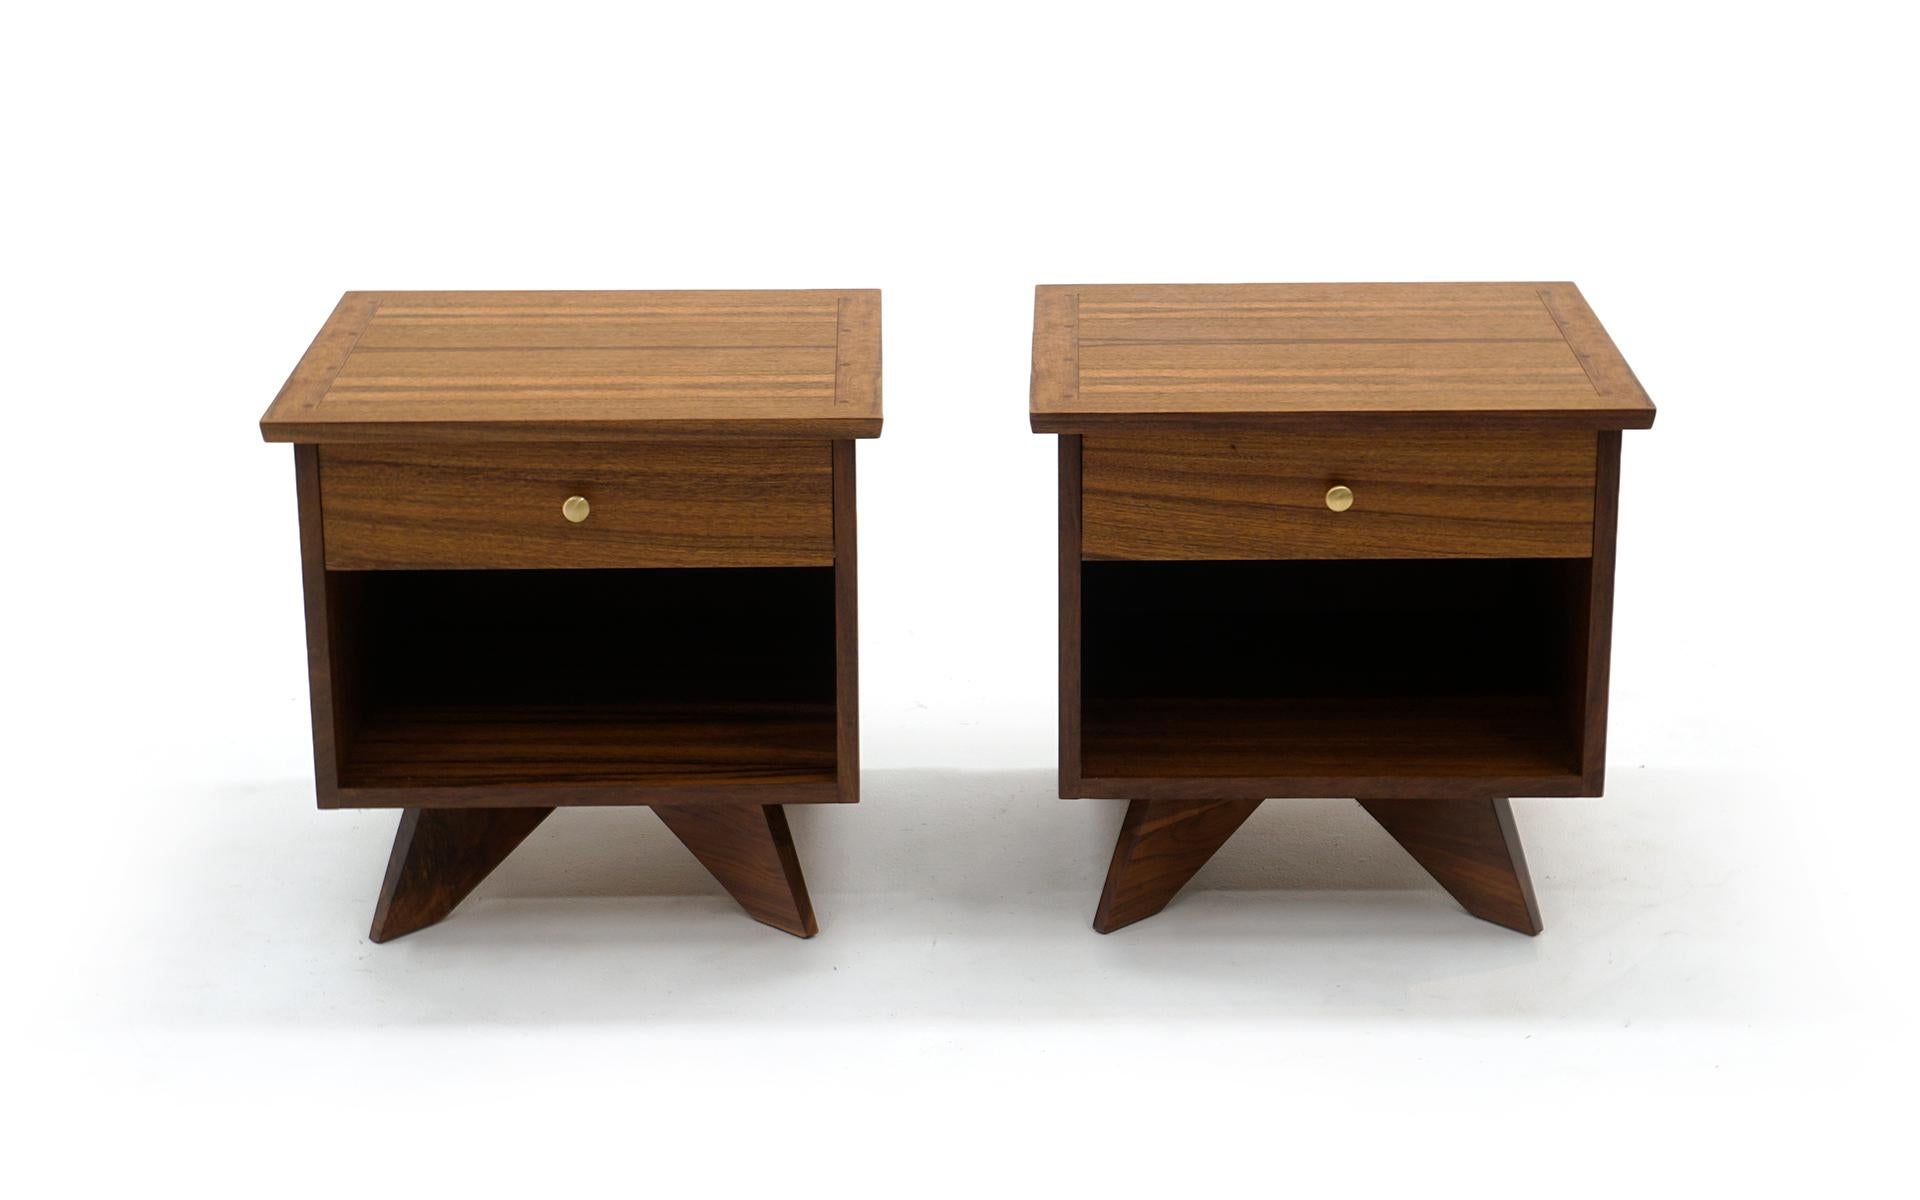 Pair of nightstands or side tables designed by George Nakashima for his Origins series with Sundra finish (meaning thing of beauty) made by Widdicomb, 1950s. Constructed of East Indian Laurel wood. This along with the matching headboard and coffee